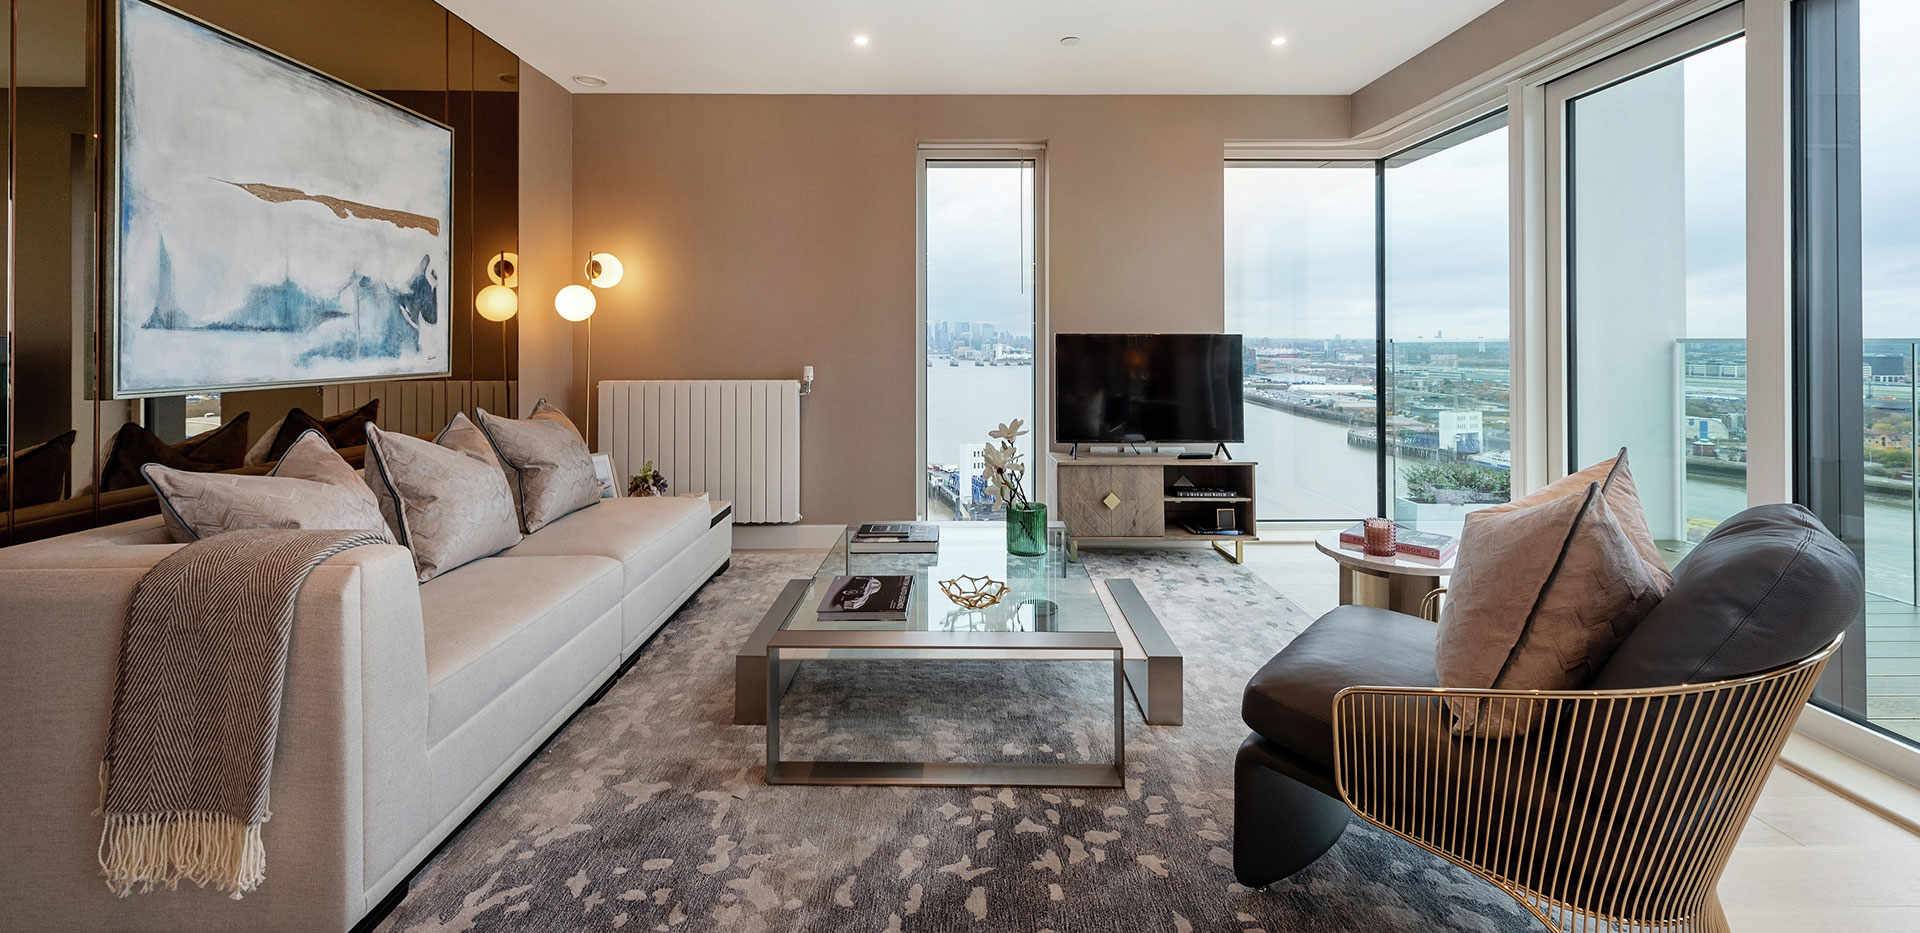 A unique location within the Royal Borough of Greenwich, with far reaching river views over the city from this Duplex Penthouse.